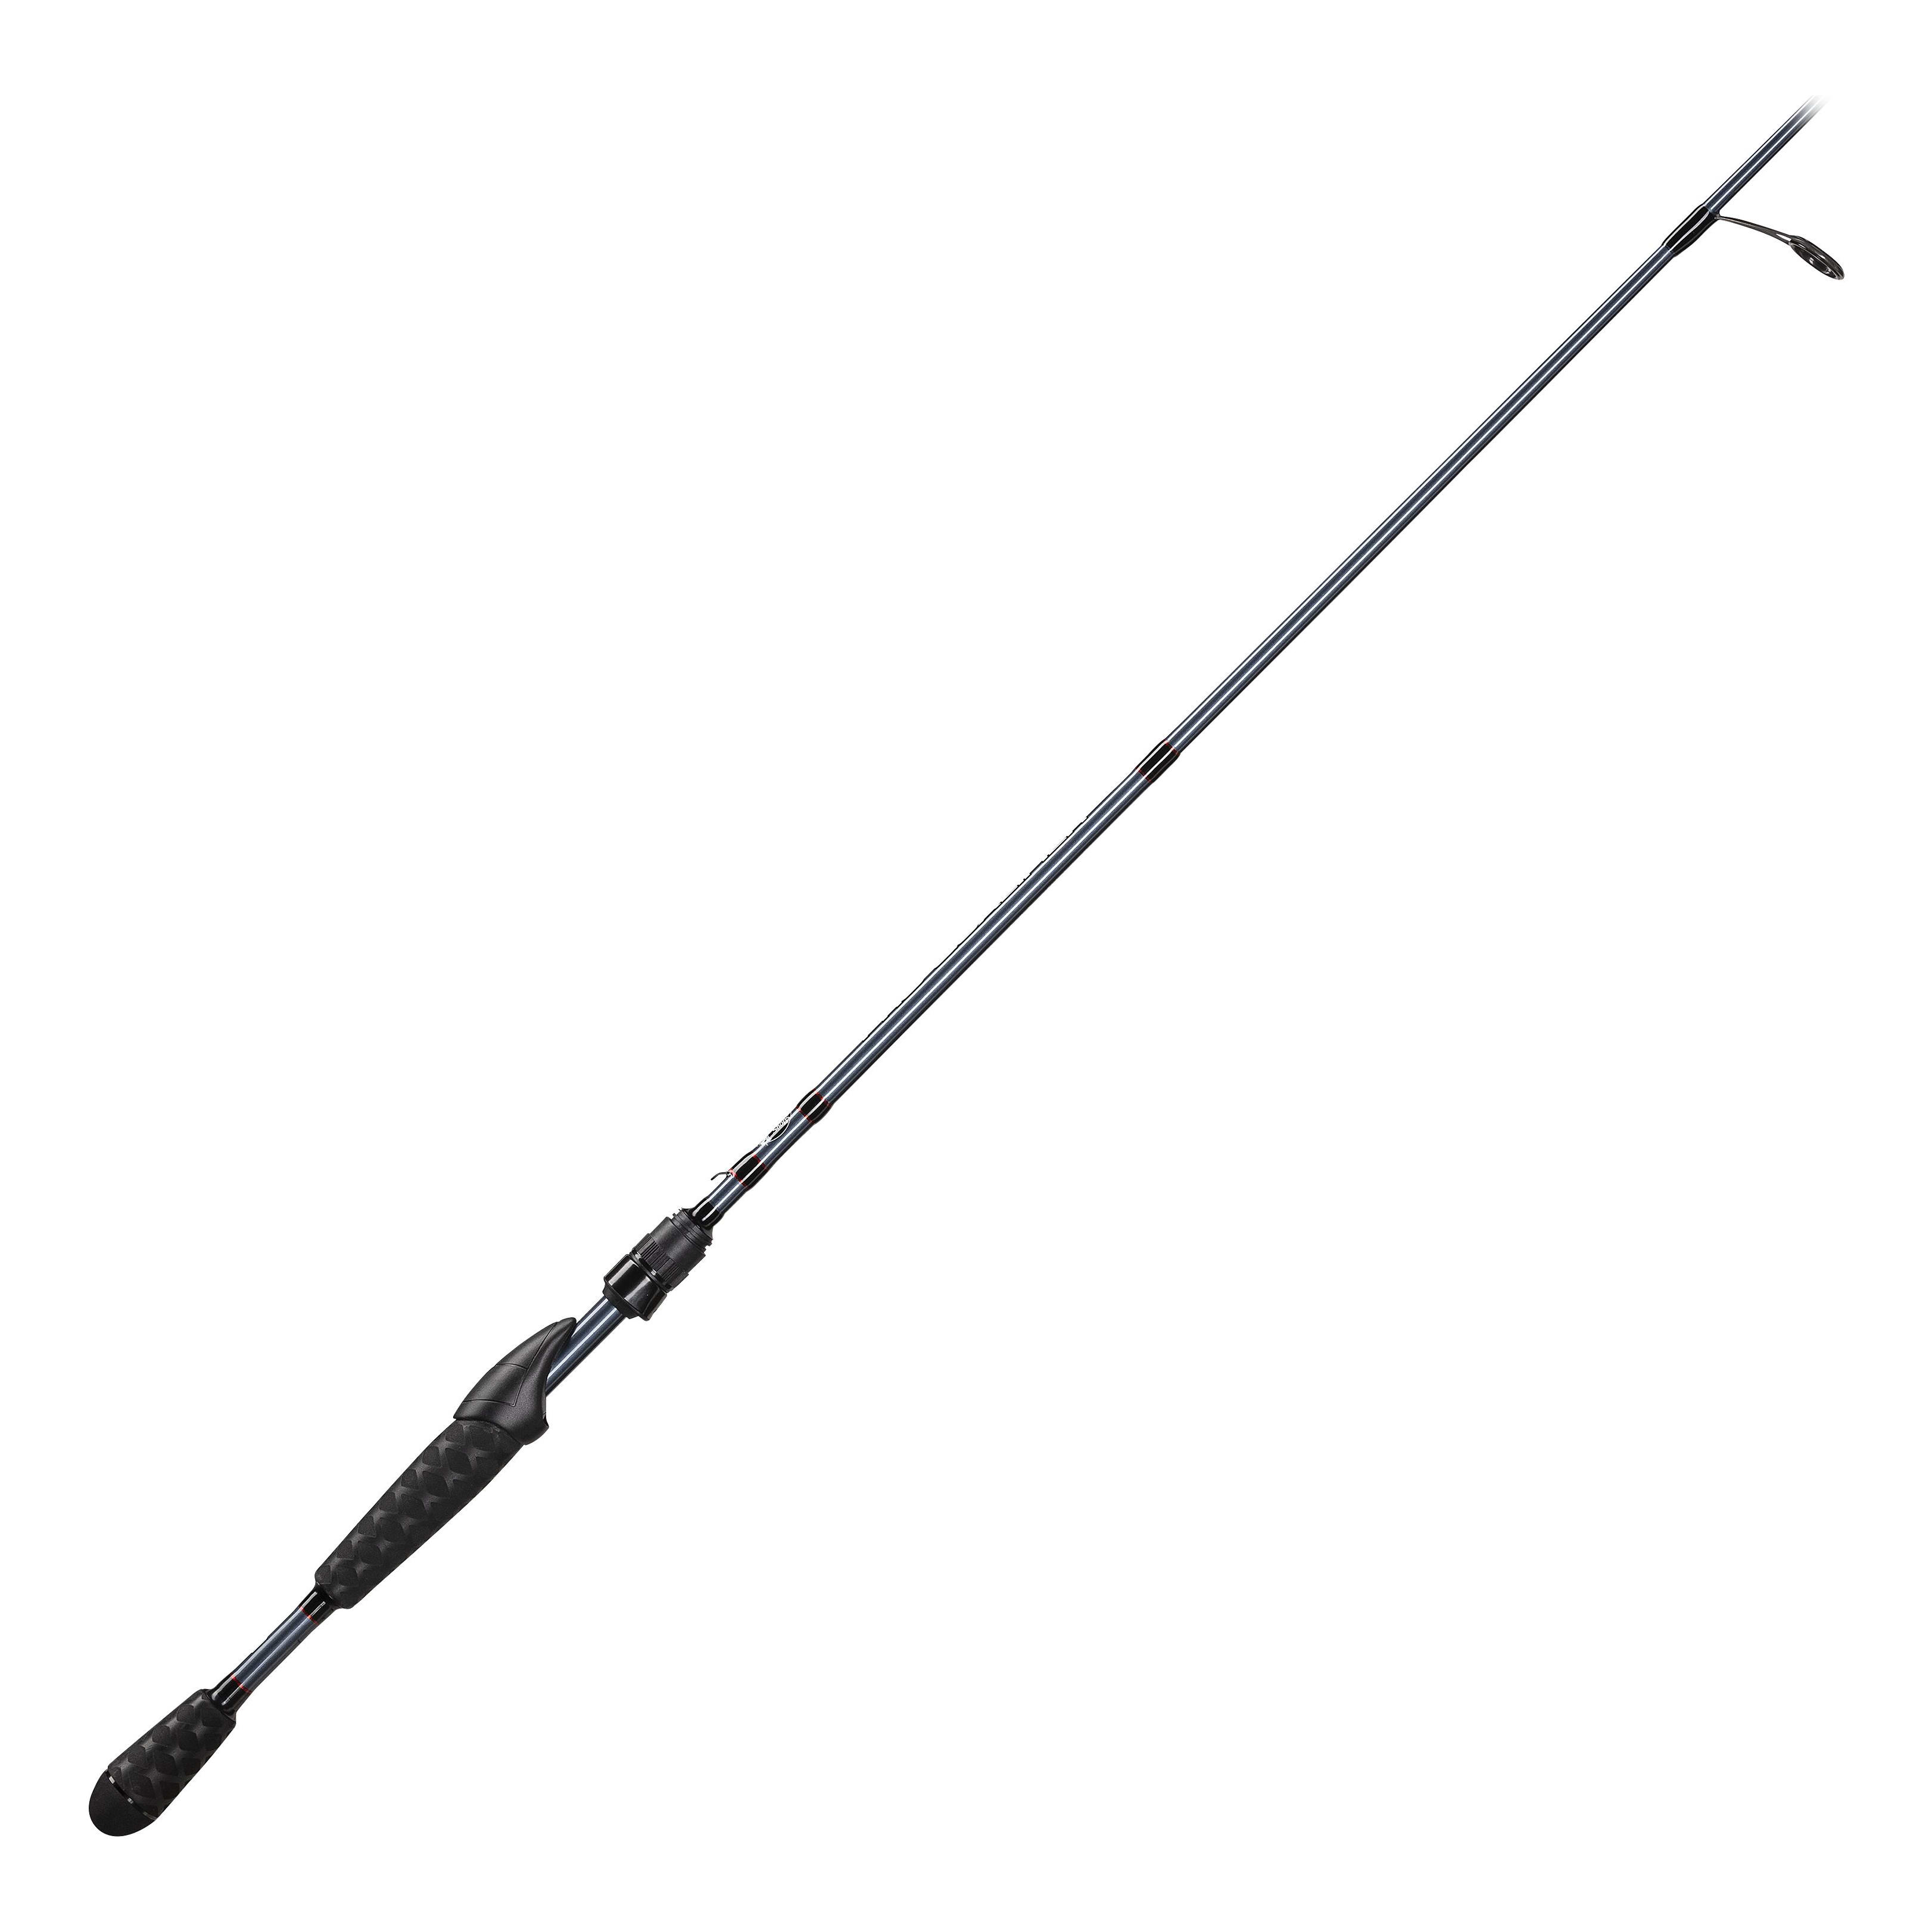 Review on 6th sense LUX rod and daiwa 150HS - Fishing Rods, Reels